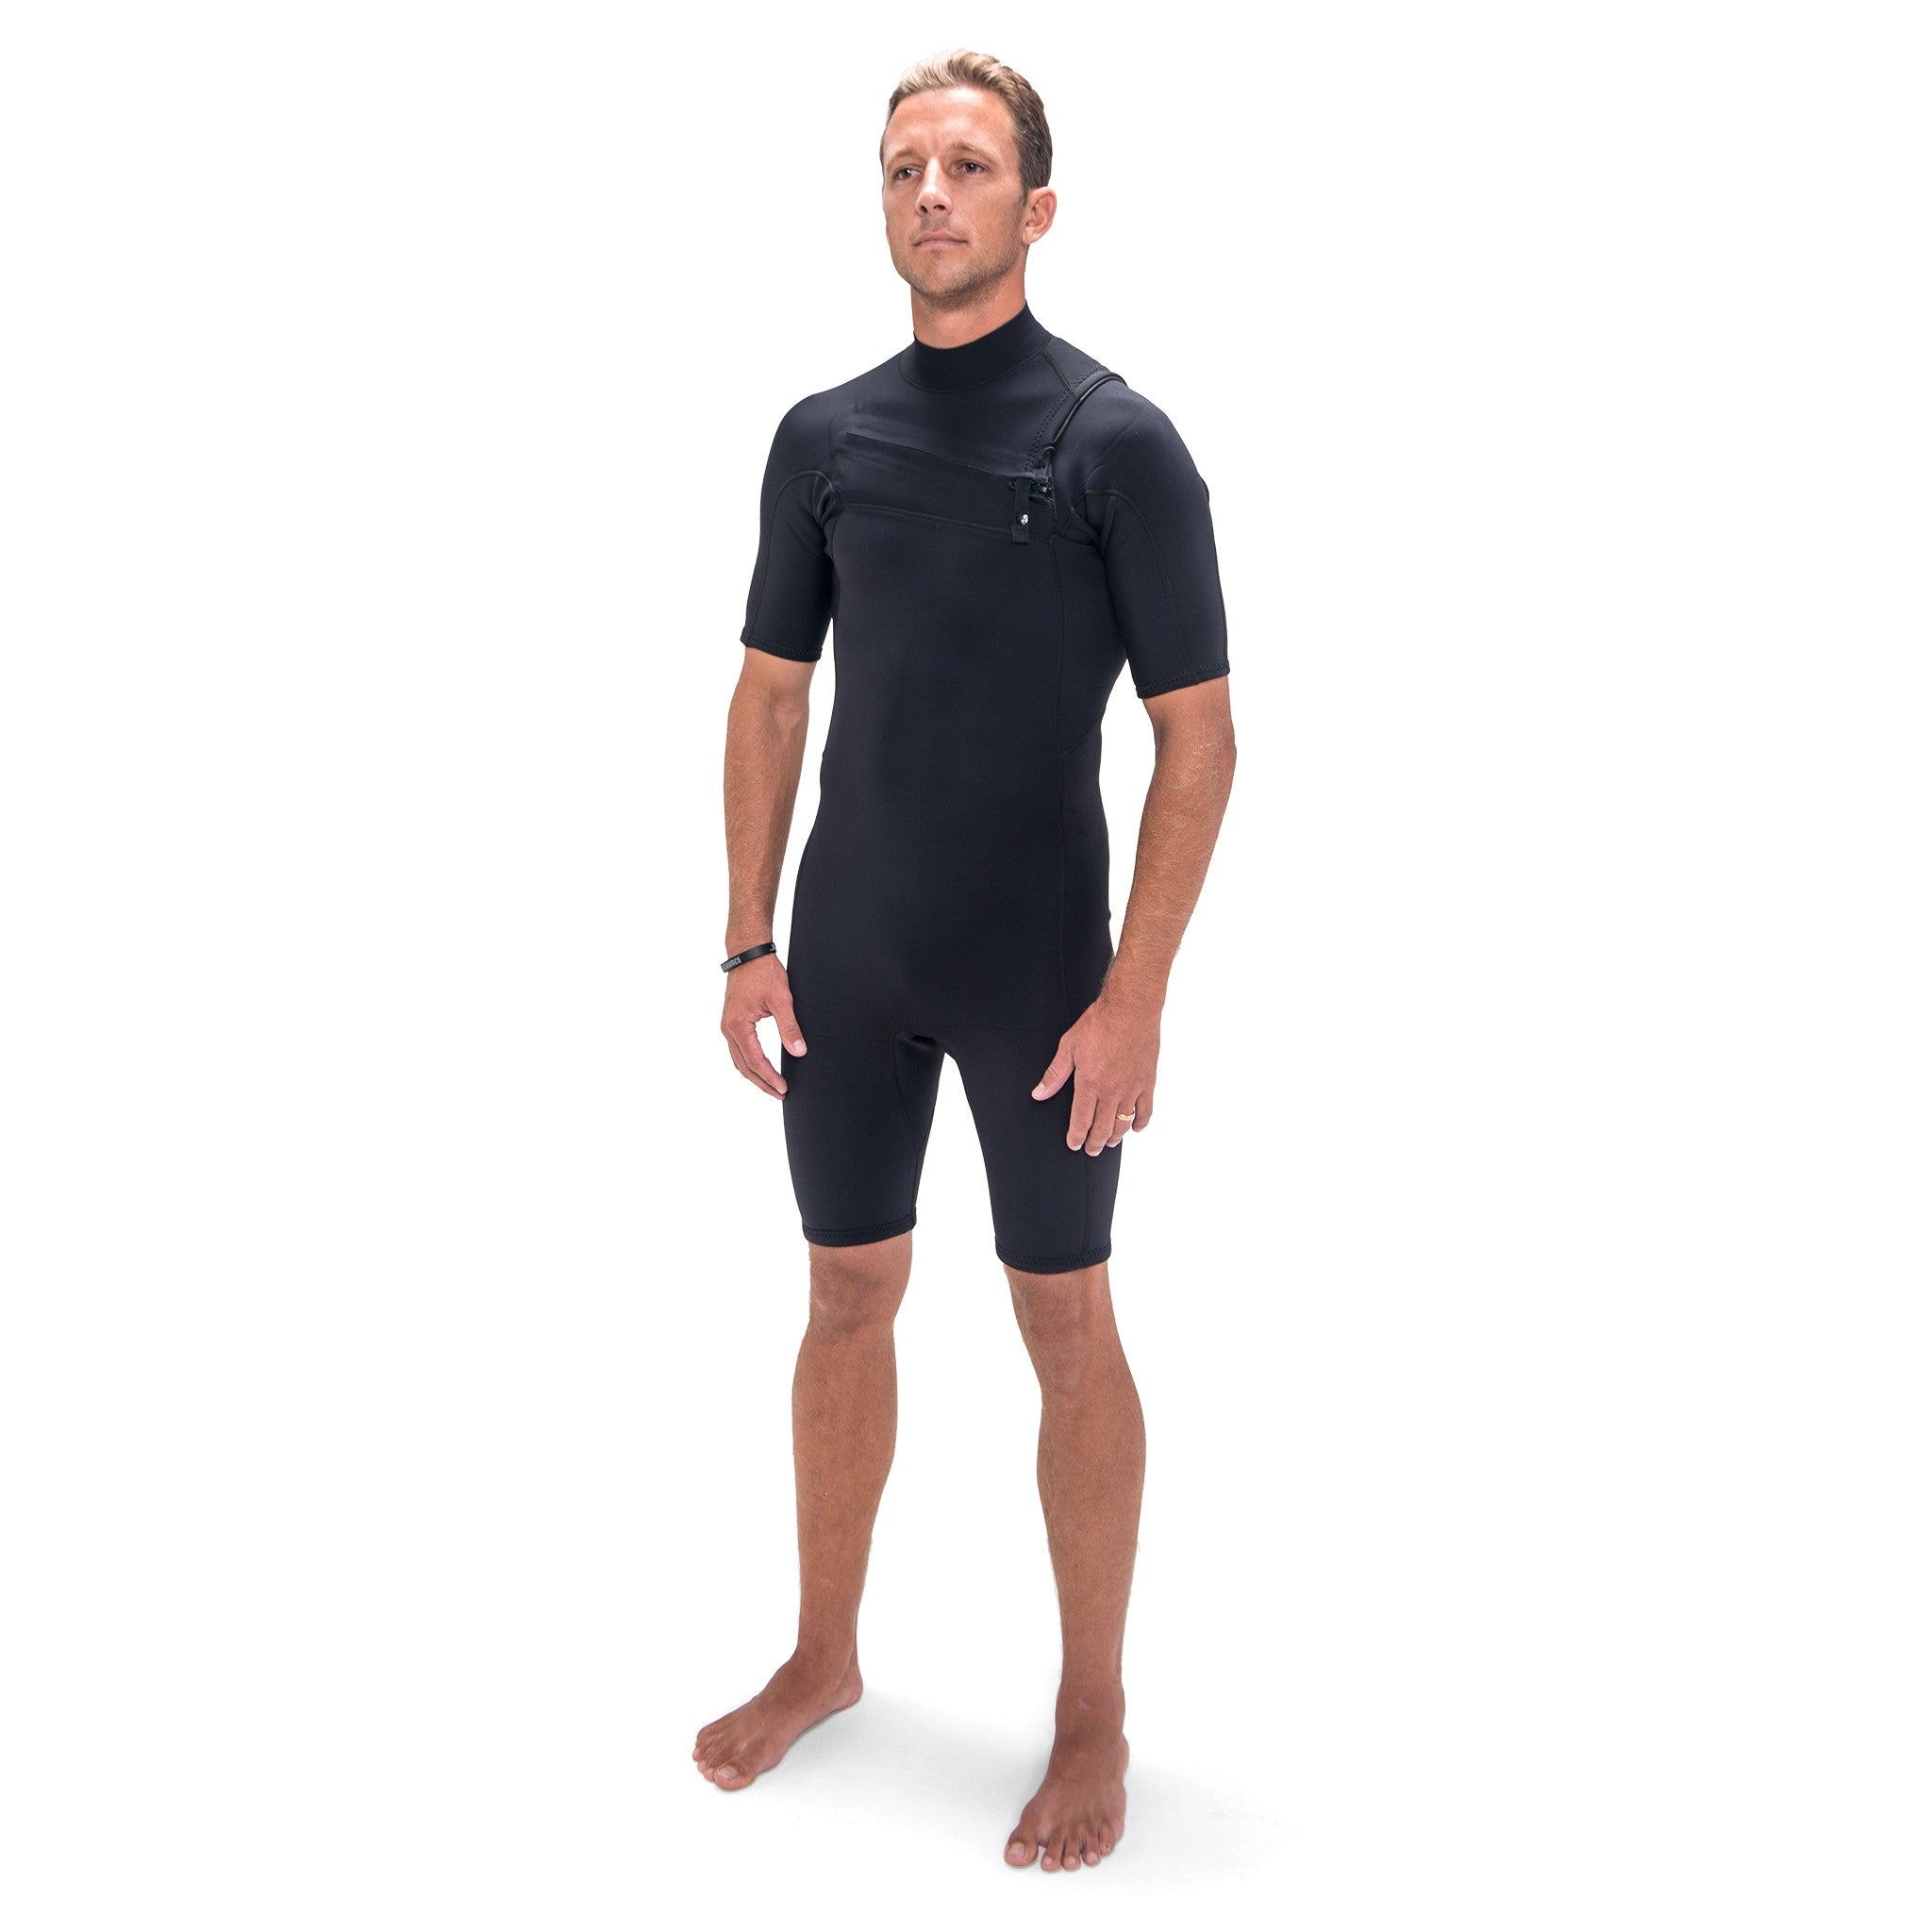 Groundswell Supply Custom Made Wetsuit (Spring Suit) 1